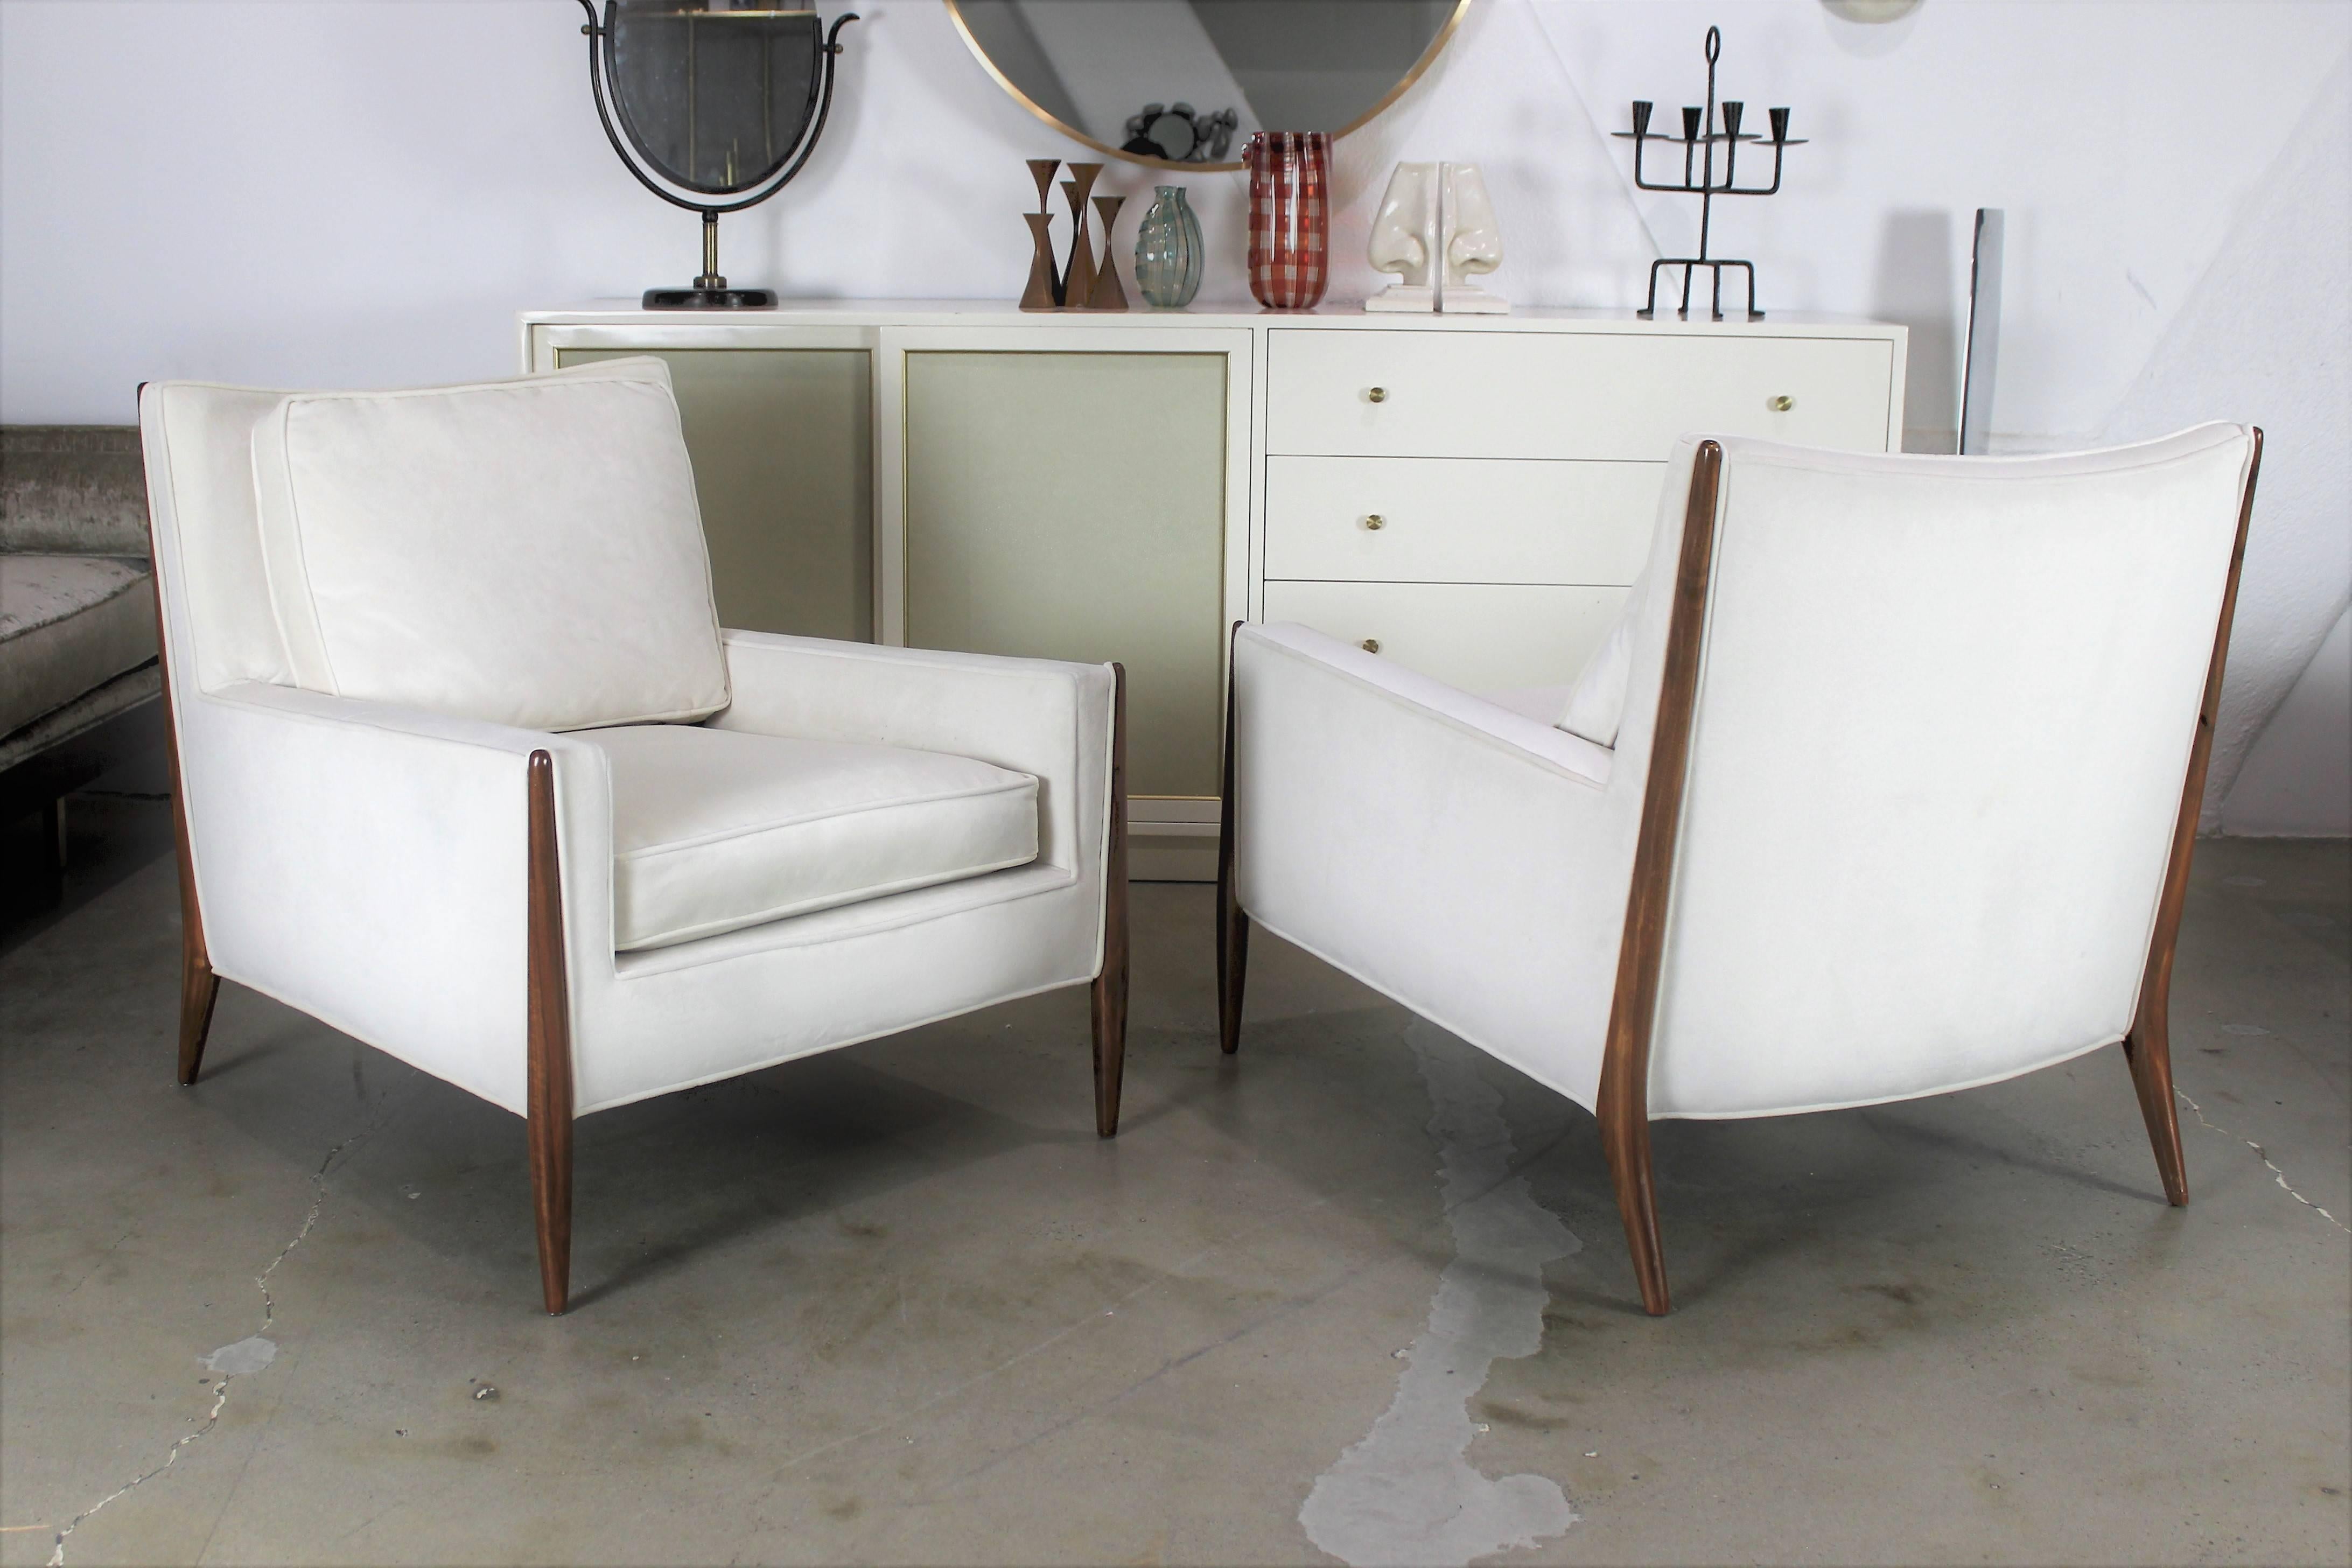 Pair of sculptural lounge chairs after Paul McCobb. Very comfortable and well made. Walnut frames have been refinished. Upholstery is a white velvet. 

See this item in our private NYC showroom! Refine Limited is located in the heart of Chelsea at